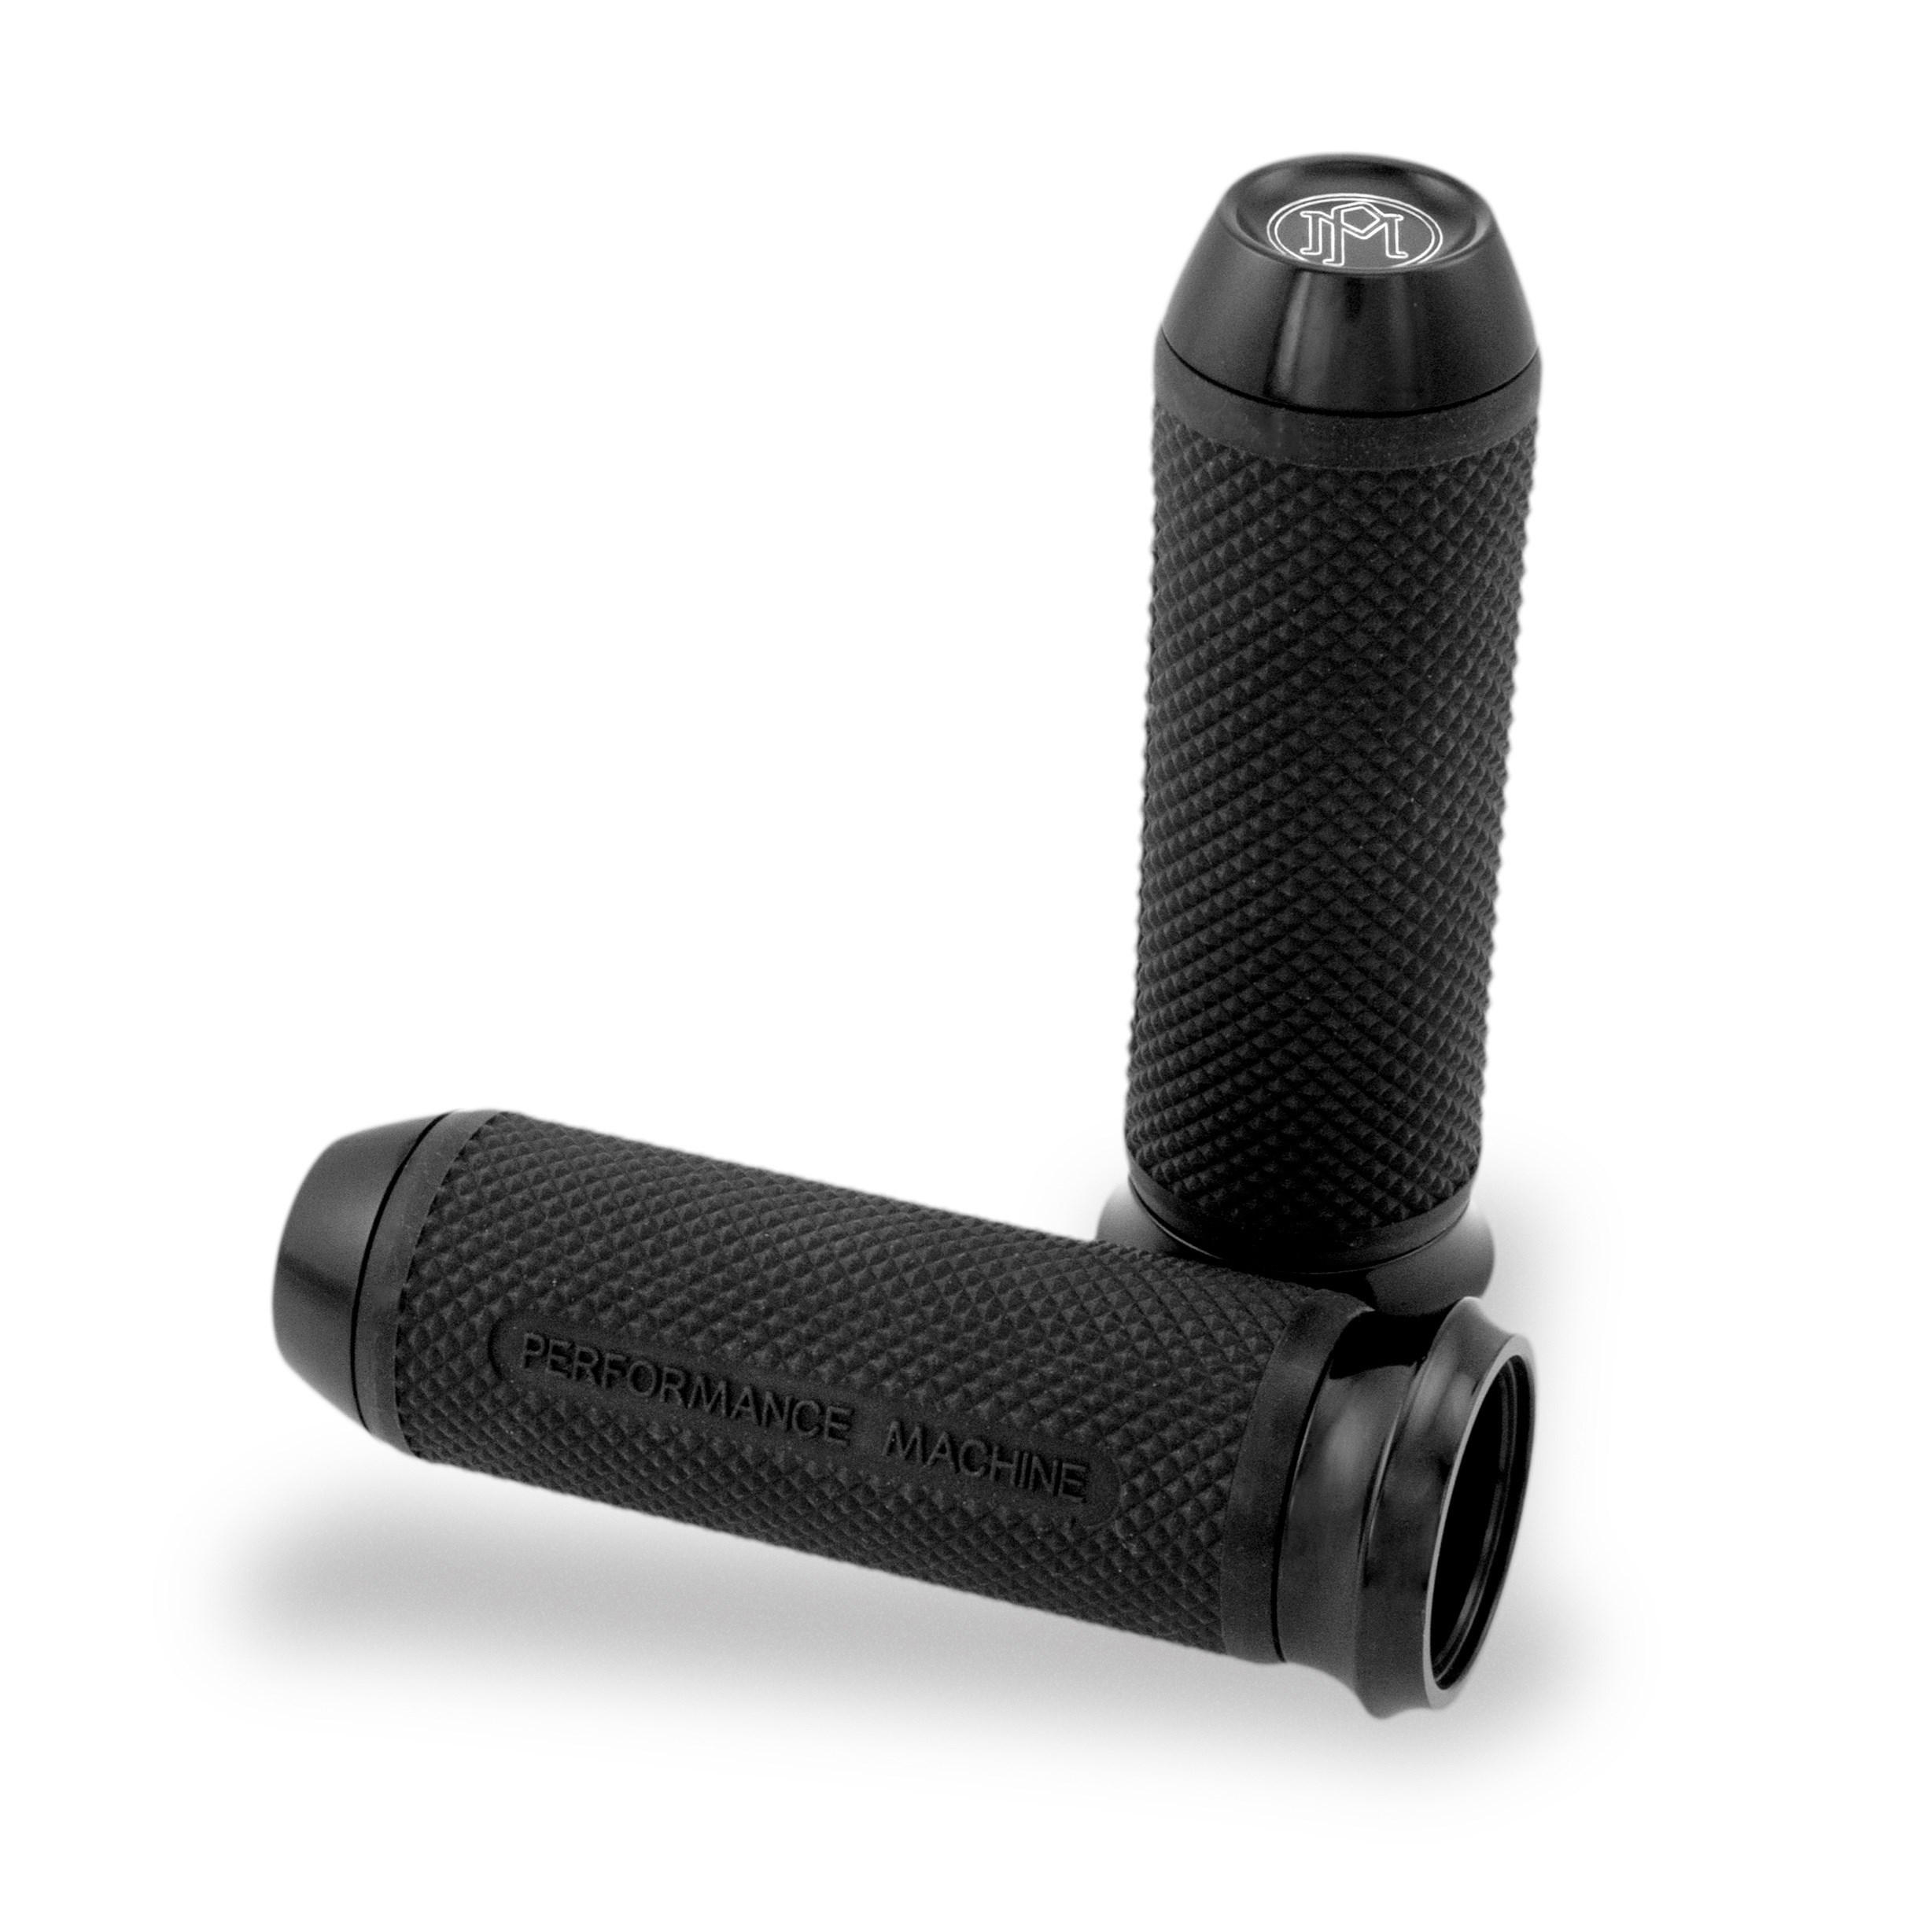 Black for sale online Contour Renthal Wrapped Grips Performance Machine 0063-2020-B Standard